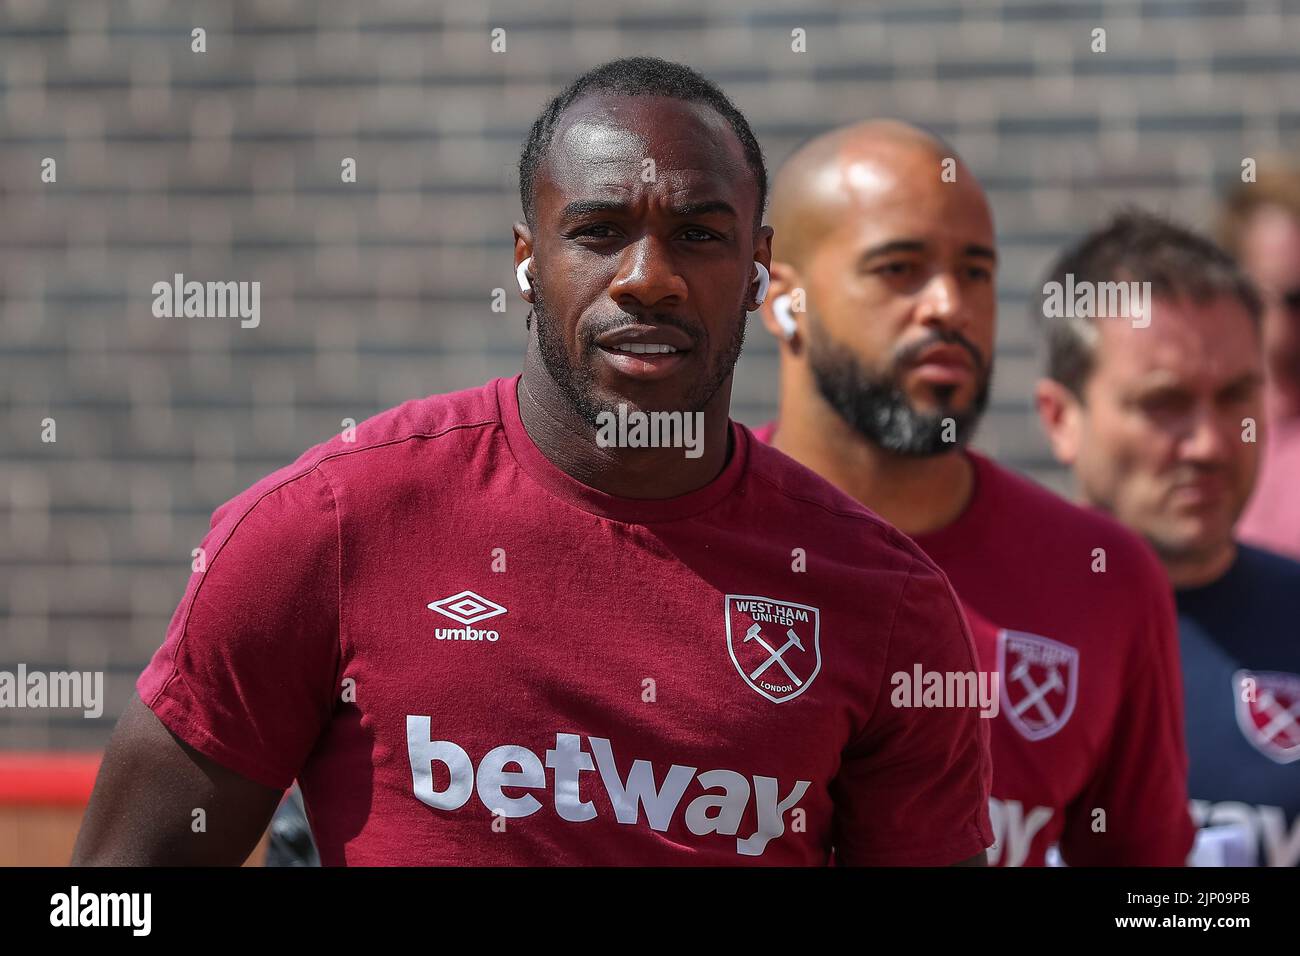 Michail Antonio #9 of West Ham United arrives at the game prior to kick off Stock Photo